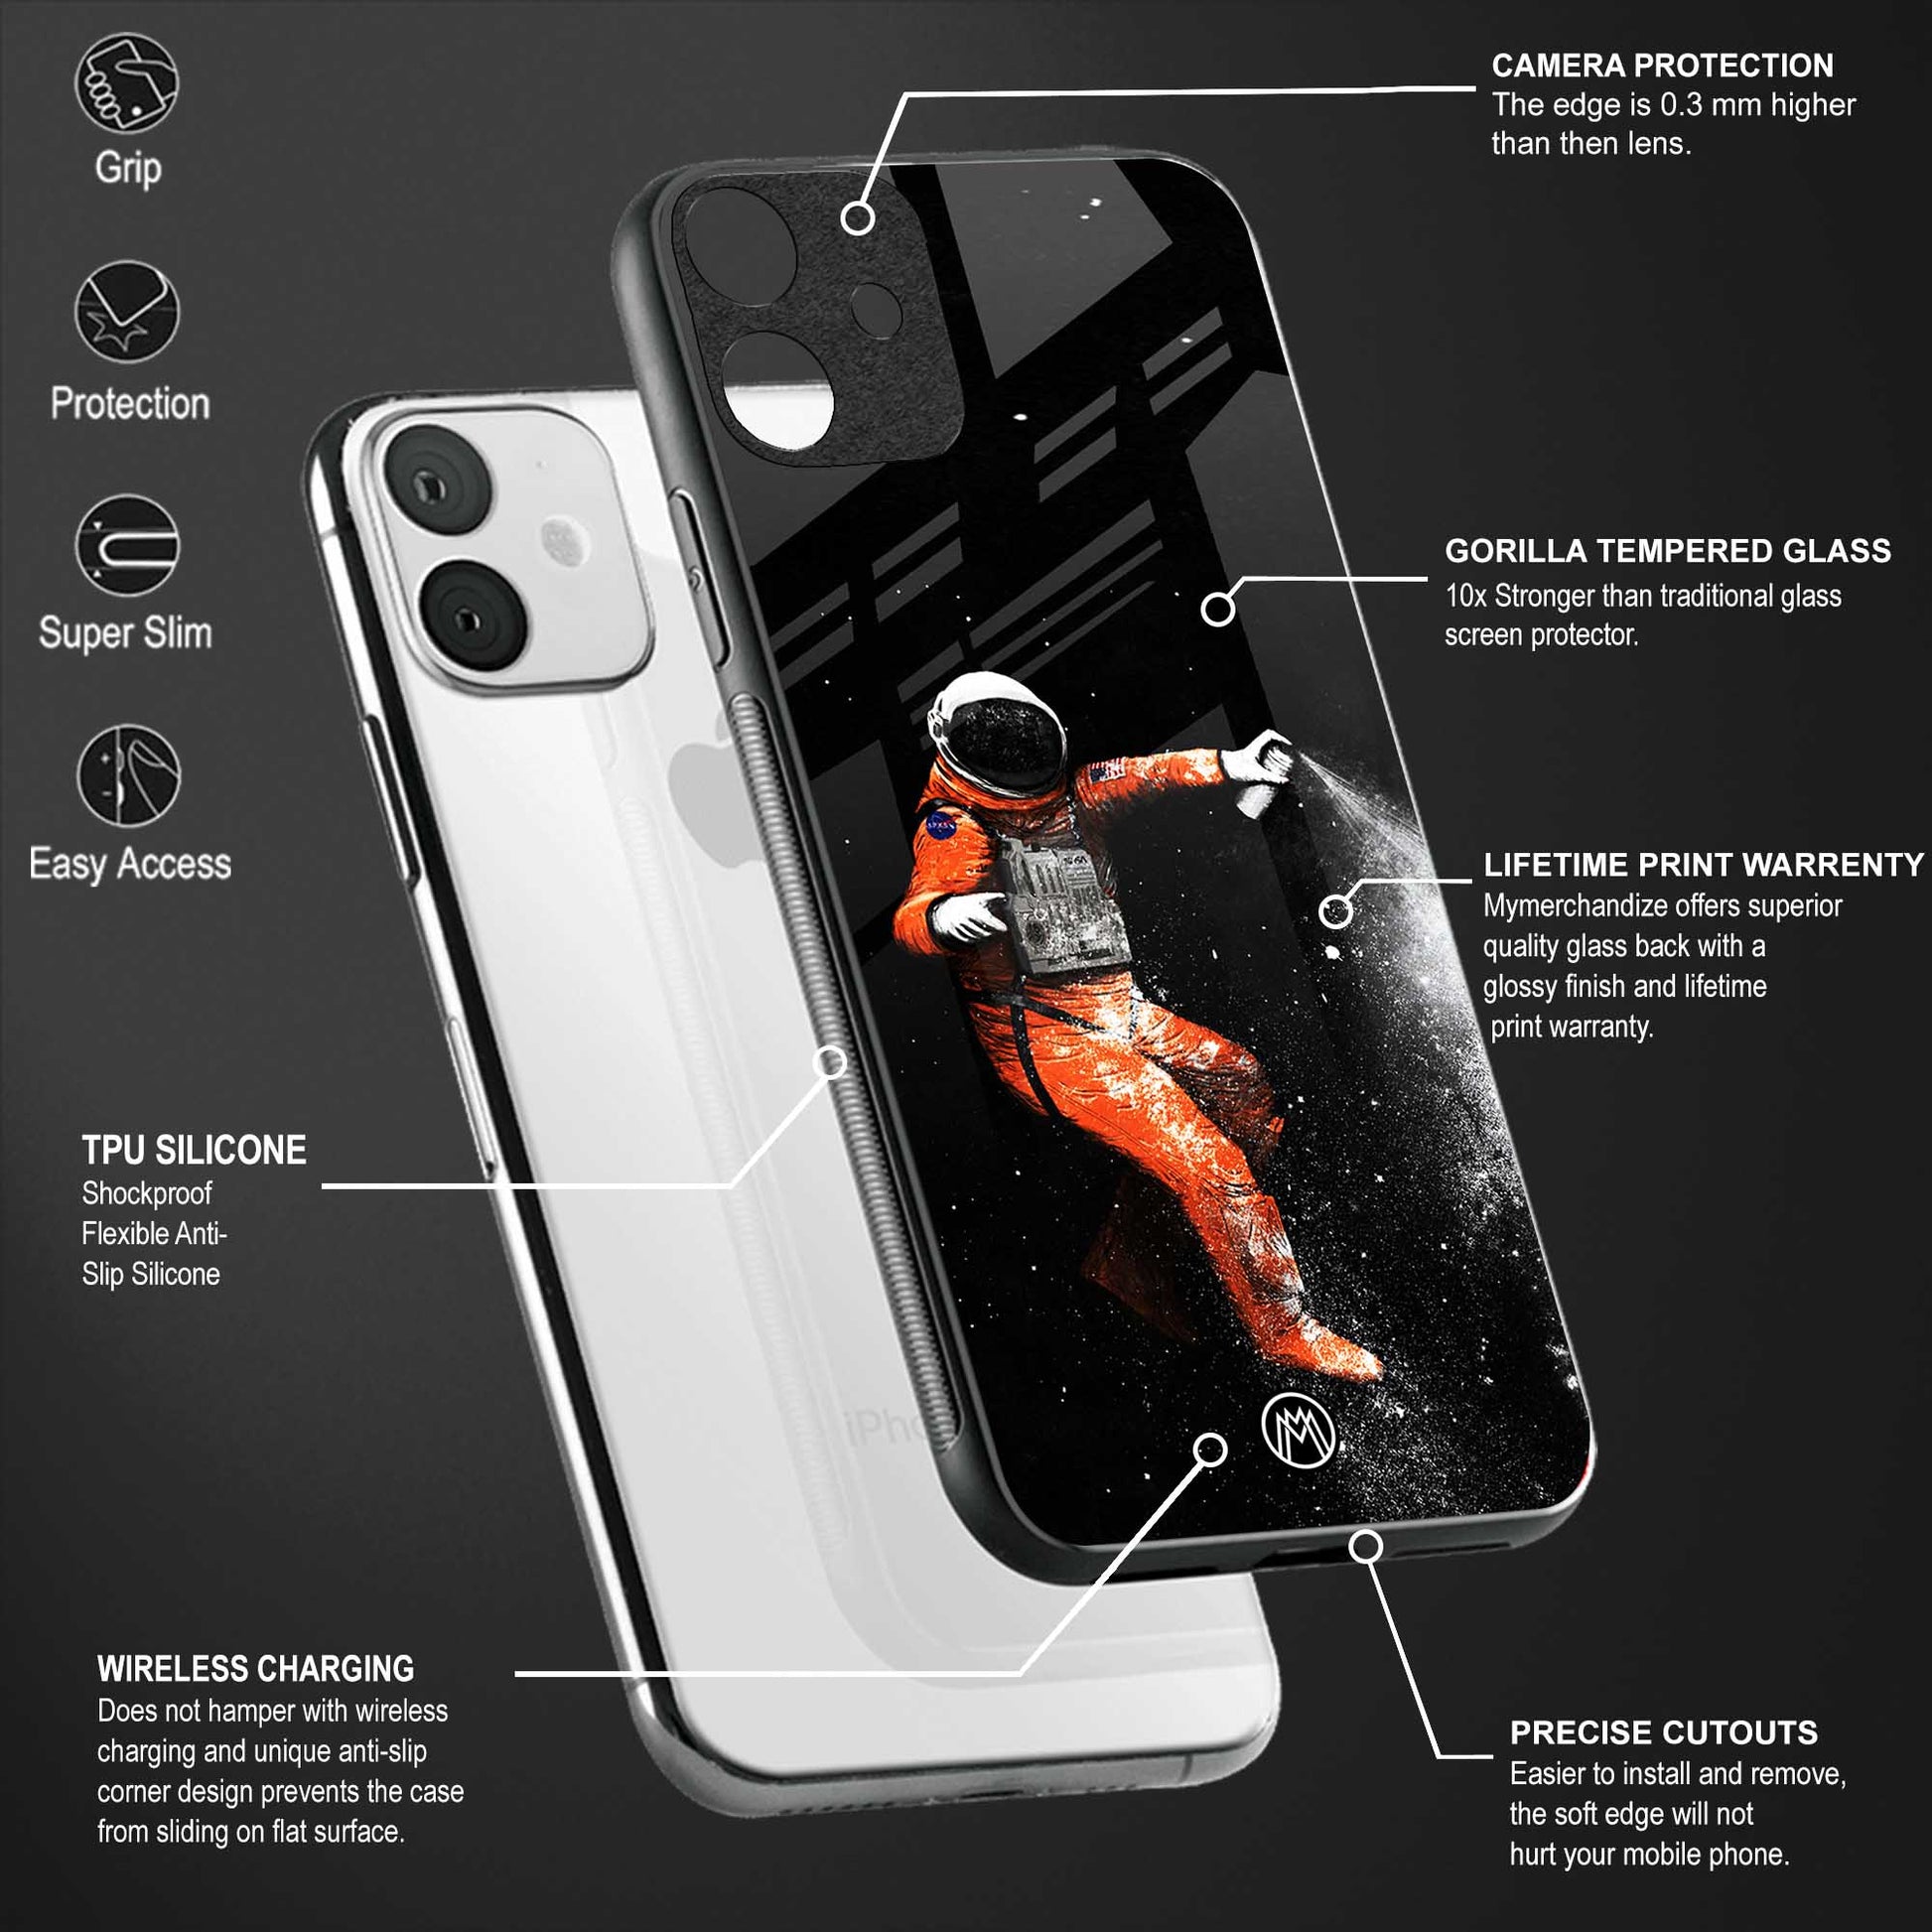 trippy astronaut back phone cover | glass case for redmi note 11 pro plus 4g/5g